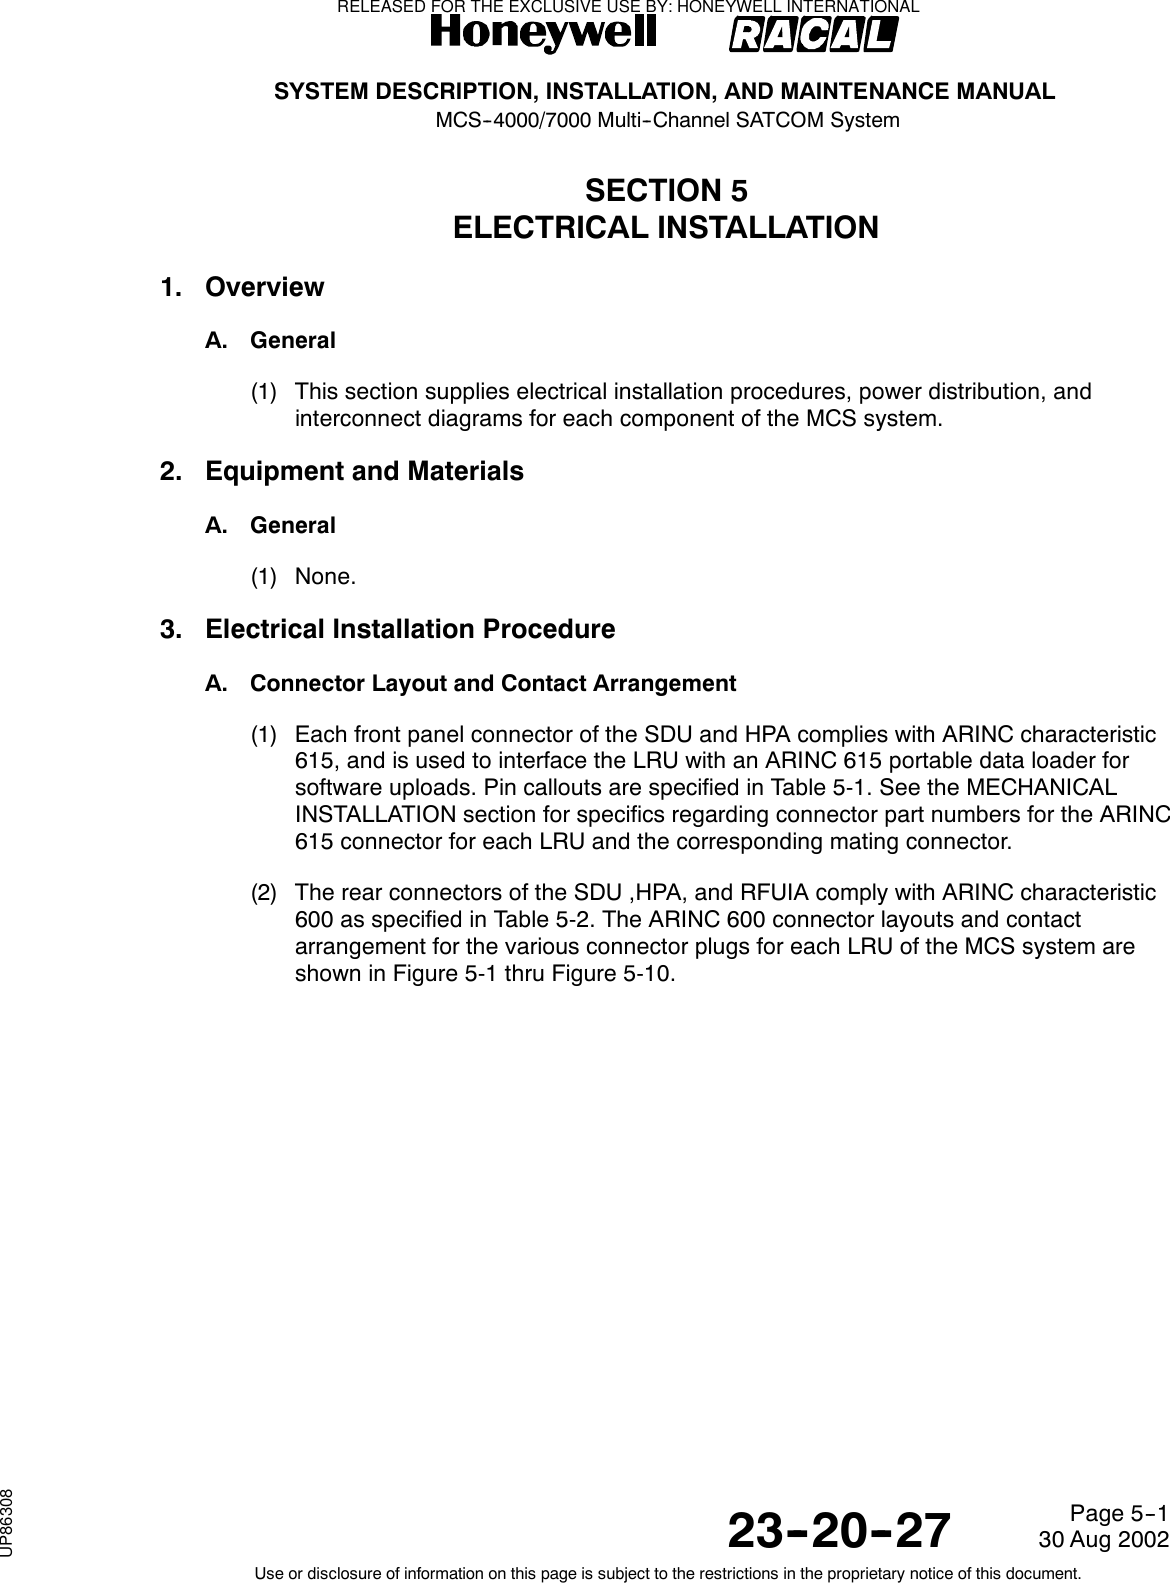 SYSTEM DESCRIPTION, INSTALLATION, AND MAINTENANCE MANUALMCS--4000/7000 Multi--Channel SATCOM System23--20--2730 Aug 2002Use or disclosure of information on this page is subject to the restrictions in the proprietary notice of this document.Page 5--1SECTION 5ELECTRICAL INSTALLATION1. OverviewA. General(1) This section supplies electrical installation procedures, power distribution, andinterconnect diagrams for each component of the MCS system.2. Equipment and MaterialsA. General(1) None.3. Electrical Installation ProcedureA. Connector Layout and Contact Arrangement(1) Each front panel connector of the SDU and HPA complies with ARINC characteristic615, and is used to interface the LRU with an ARINC 615 portable data loader forsoftware uploads. Pin callouts are specified in Table 5-1. See the MECHANICALINSTALLATION section for specifics regarding connector part numbers for the ARINC615 connector for each LRU and the corresponding mating connector.(2) The rear connectors of the SDU ,HPA, and RFUIA comply with ARINC characteristic600 as specified in Table 5-2. The ARINC 600 connector layouts and contactarrangement for the various connector plugs for each LRU of the MCS system areshown in Figure 5-1 thru Figure 5-10.RELEASED FOR THE EXCLUSIVE USE BY: HONEYWELL INTERNATIONALUP86308